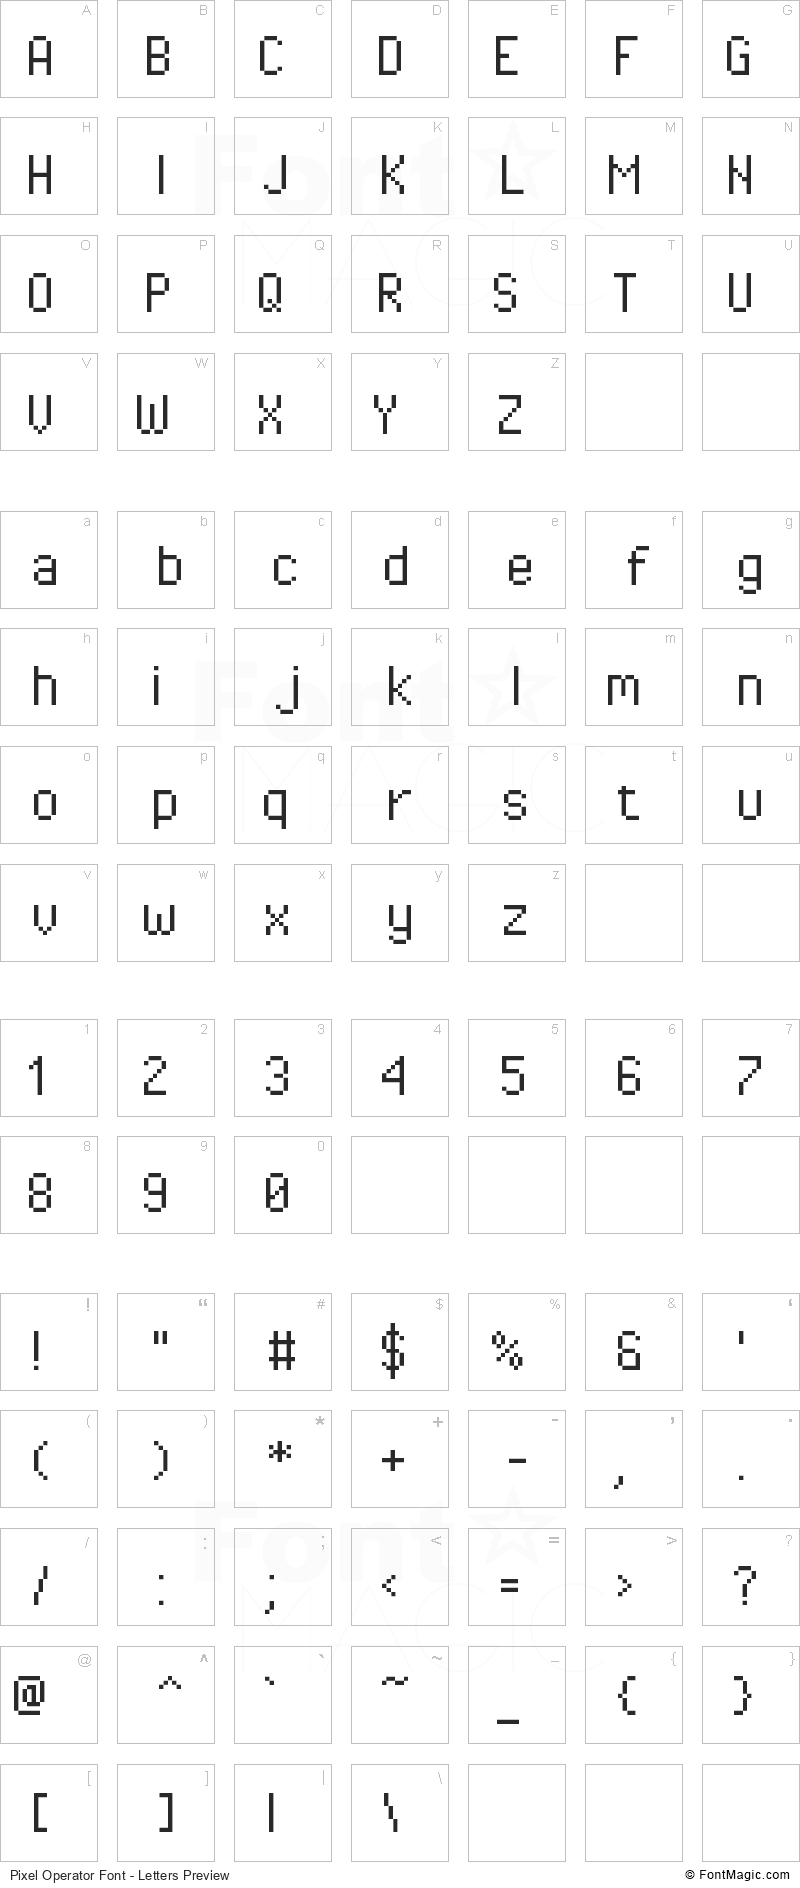 Pixel Operator Font - All Latters Preview Chart